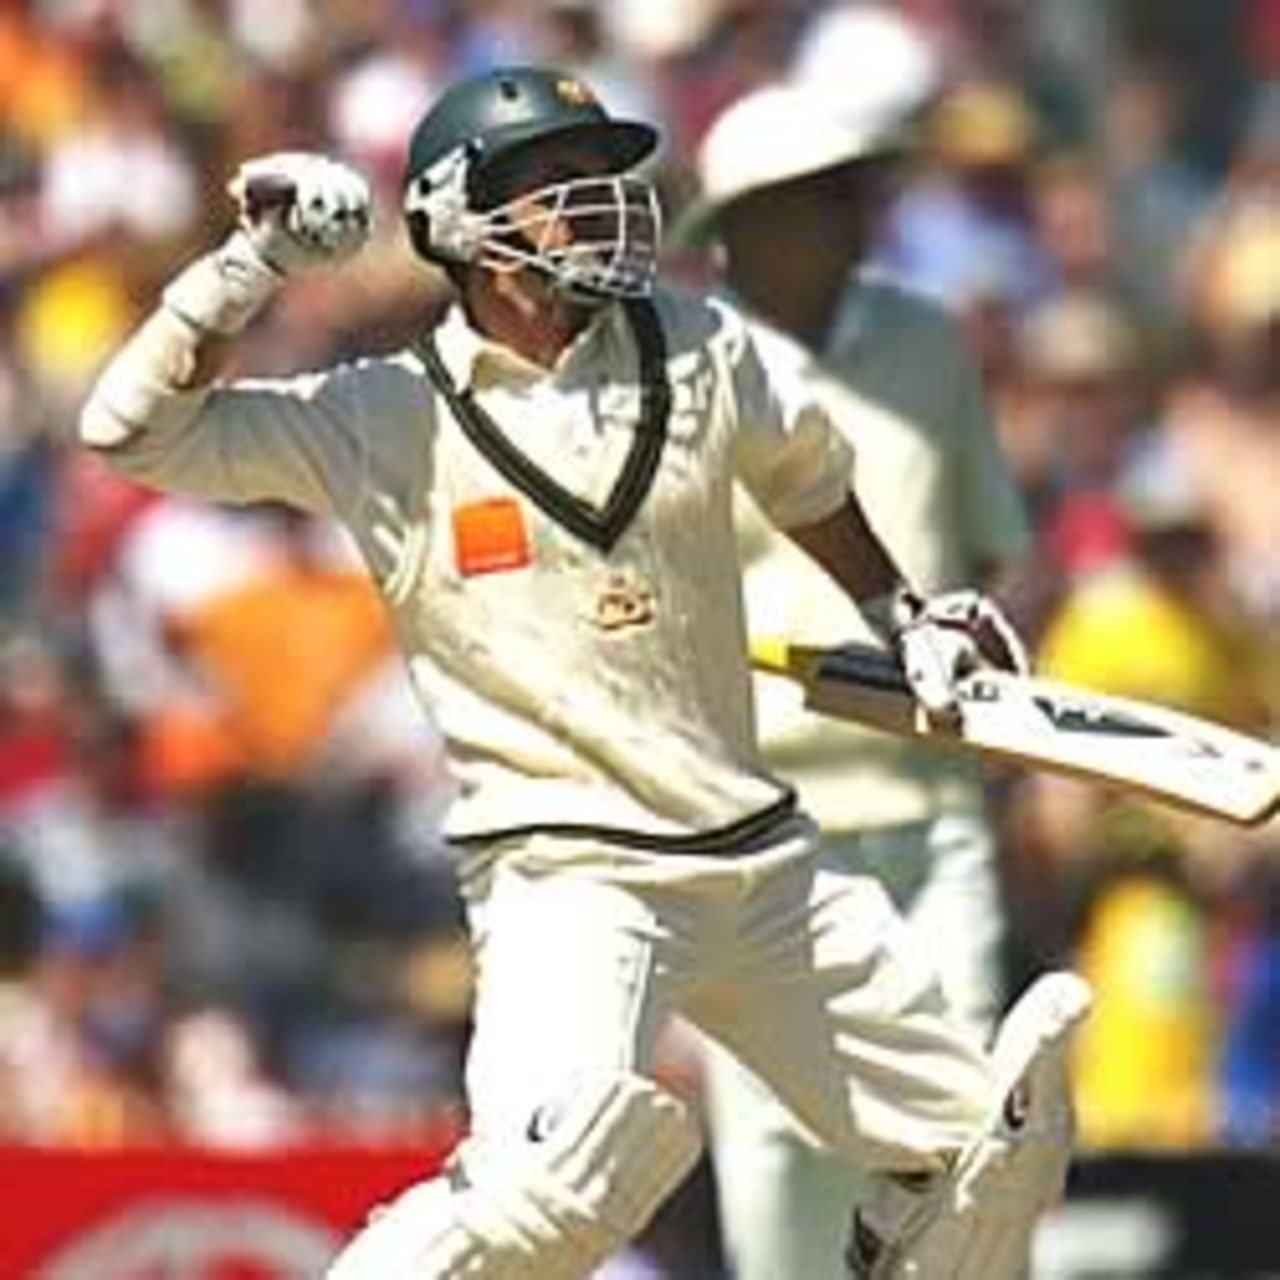 MELBOURNE - DECEMBER 26: Justin Langer of Australia reaches 100 runs during the first day of the Boxing Day Fourth Ashes Test between Australia and England at the Melbourne Cricket Ground in Melbourne, Australia on December 26, 2002.